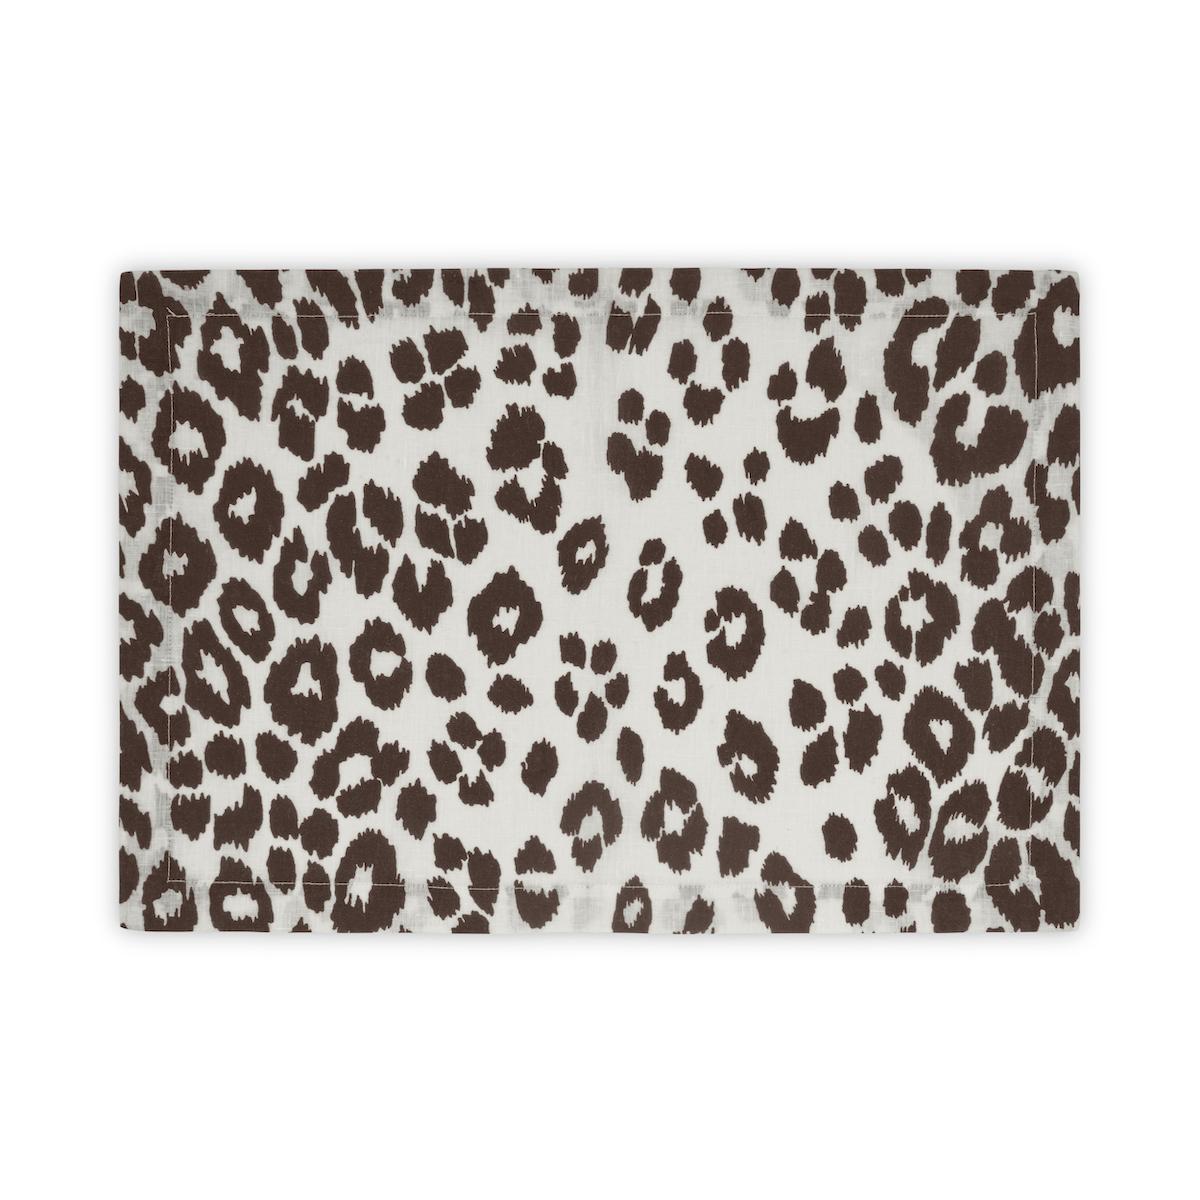 Iconic Leopard Placemat, Set of 4_CINDER